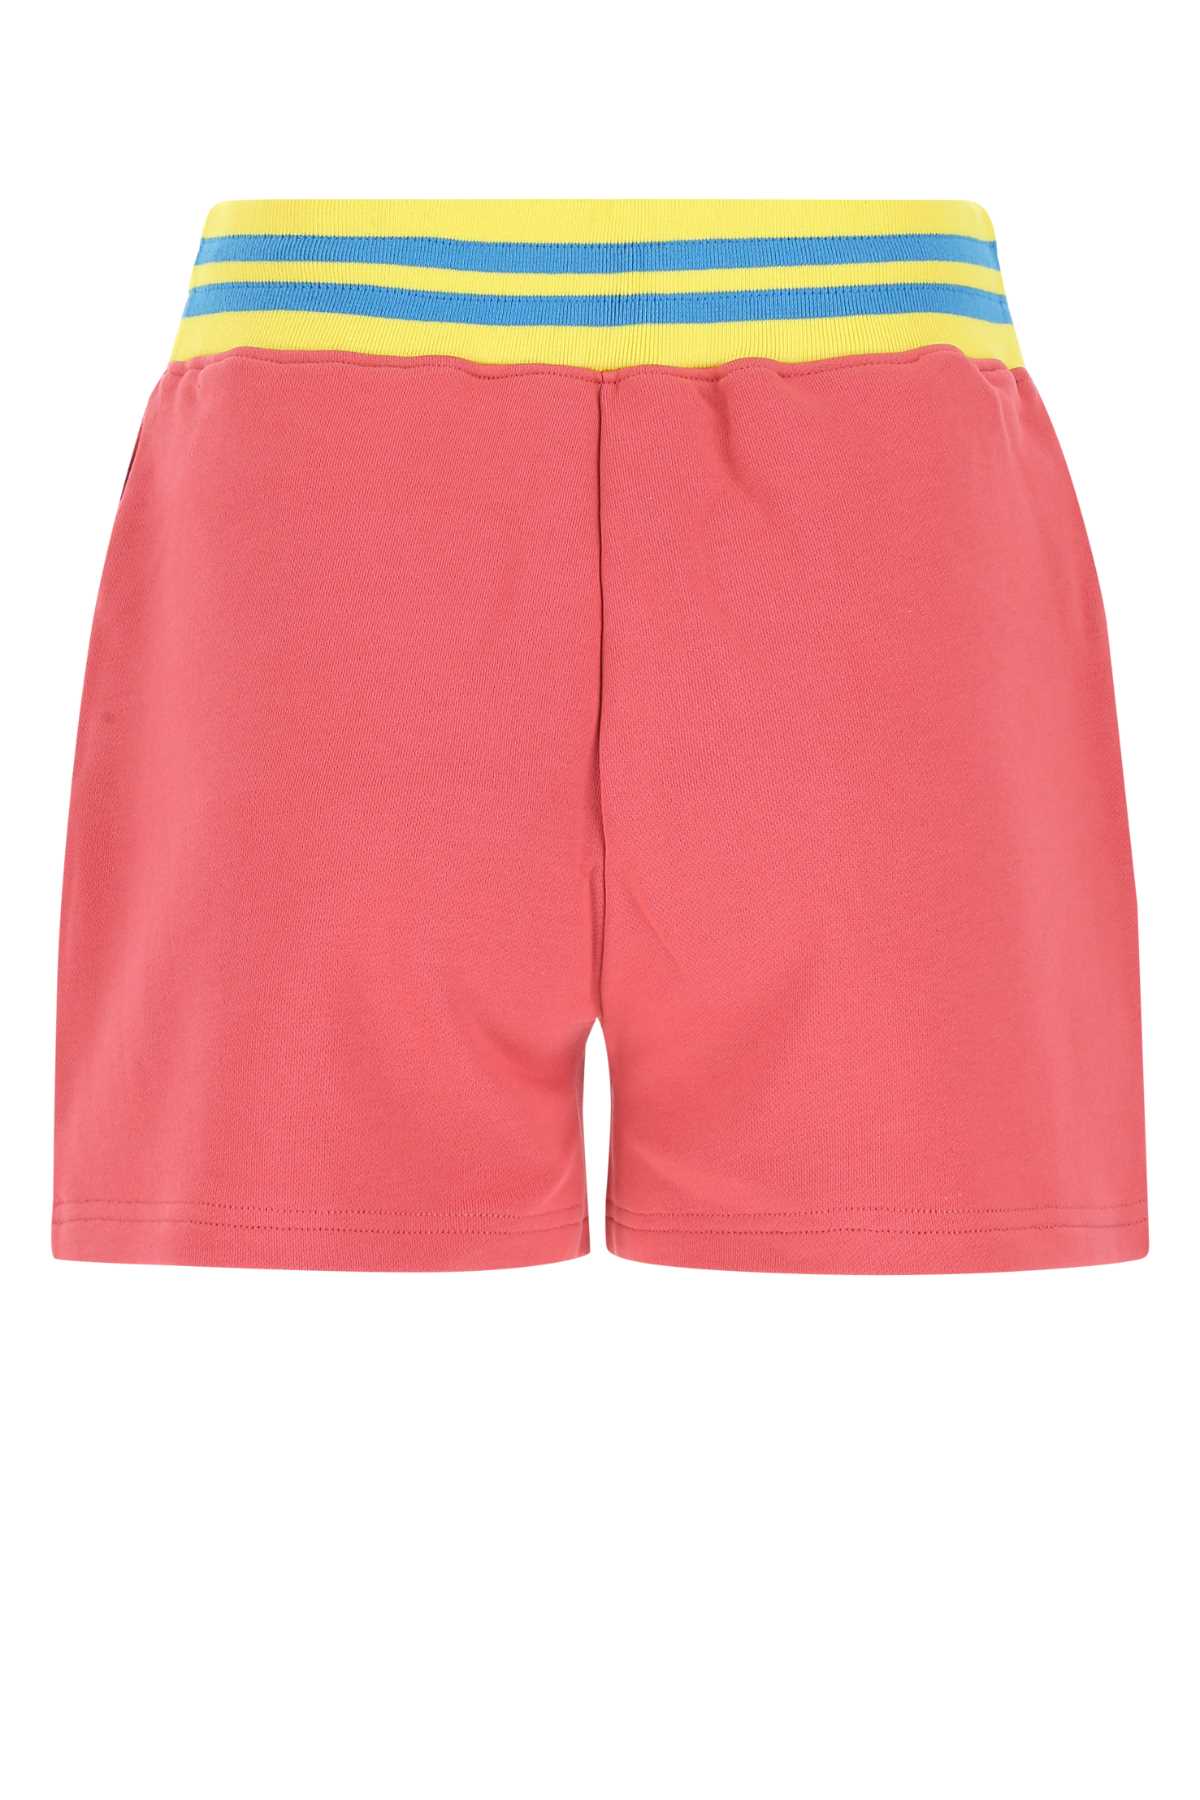 Moschino Pink Cotton Shorts In 1206